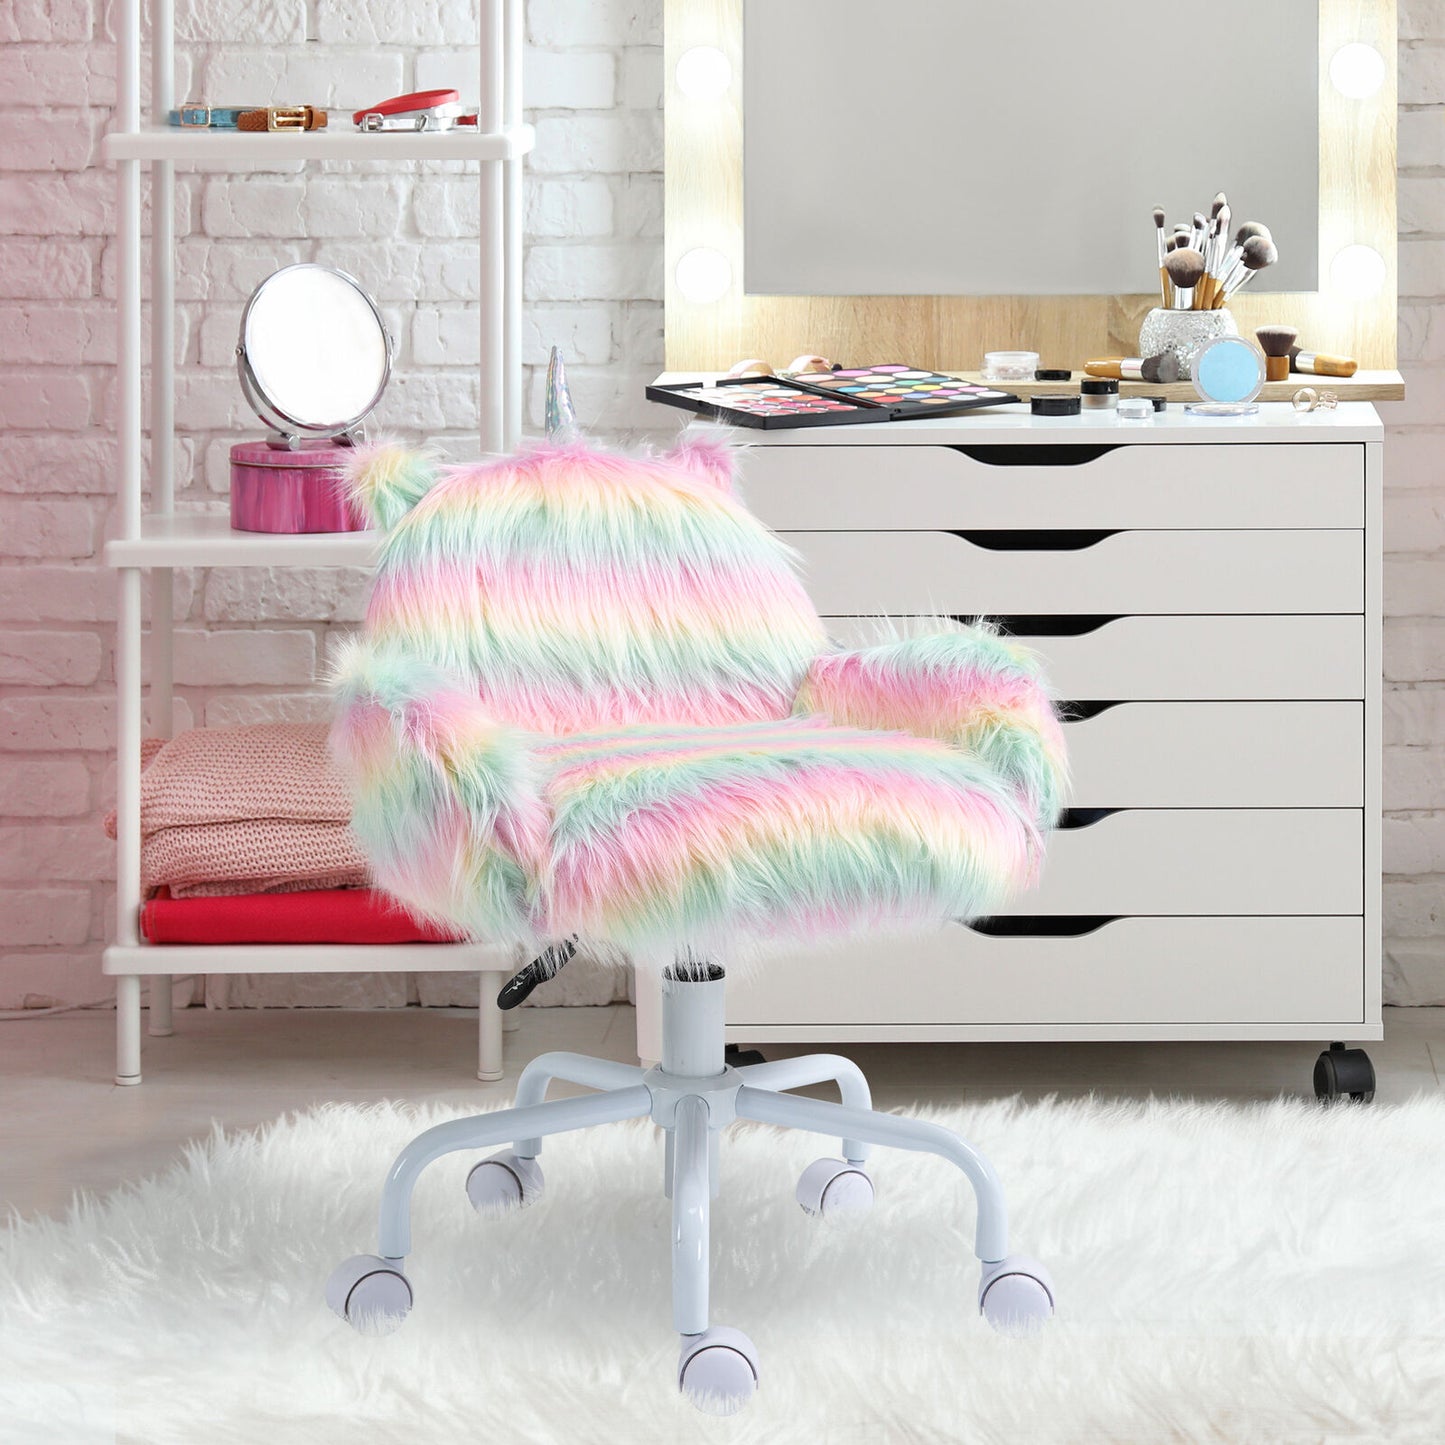 Desk Chair With Soft Cushioned Seat - Unicorn Design Computer Chair